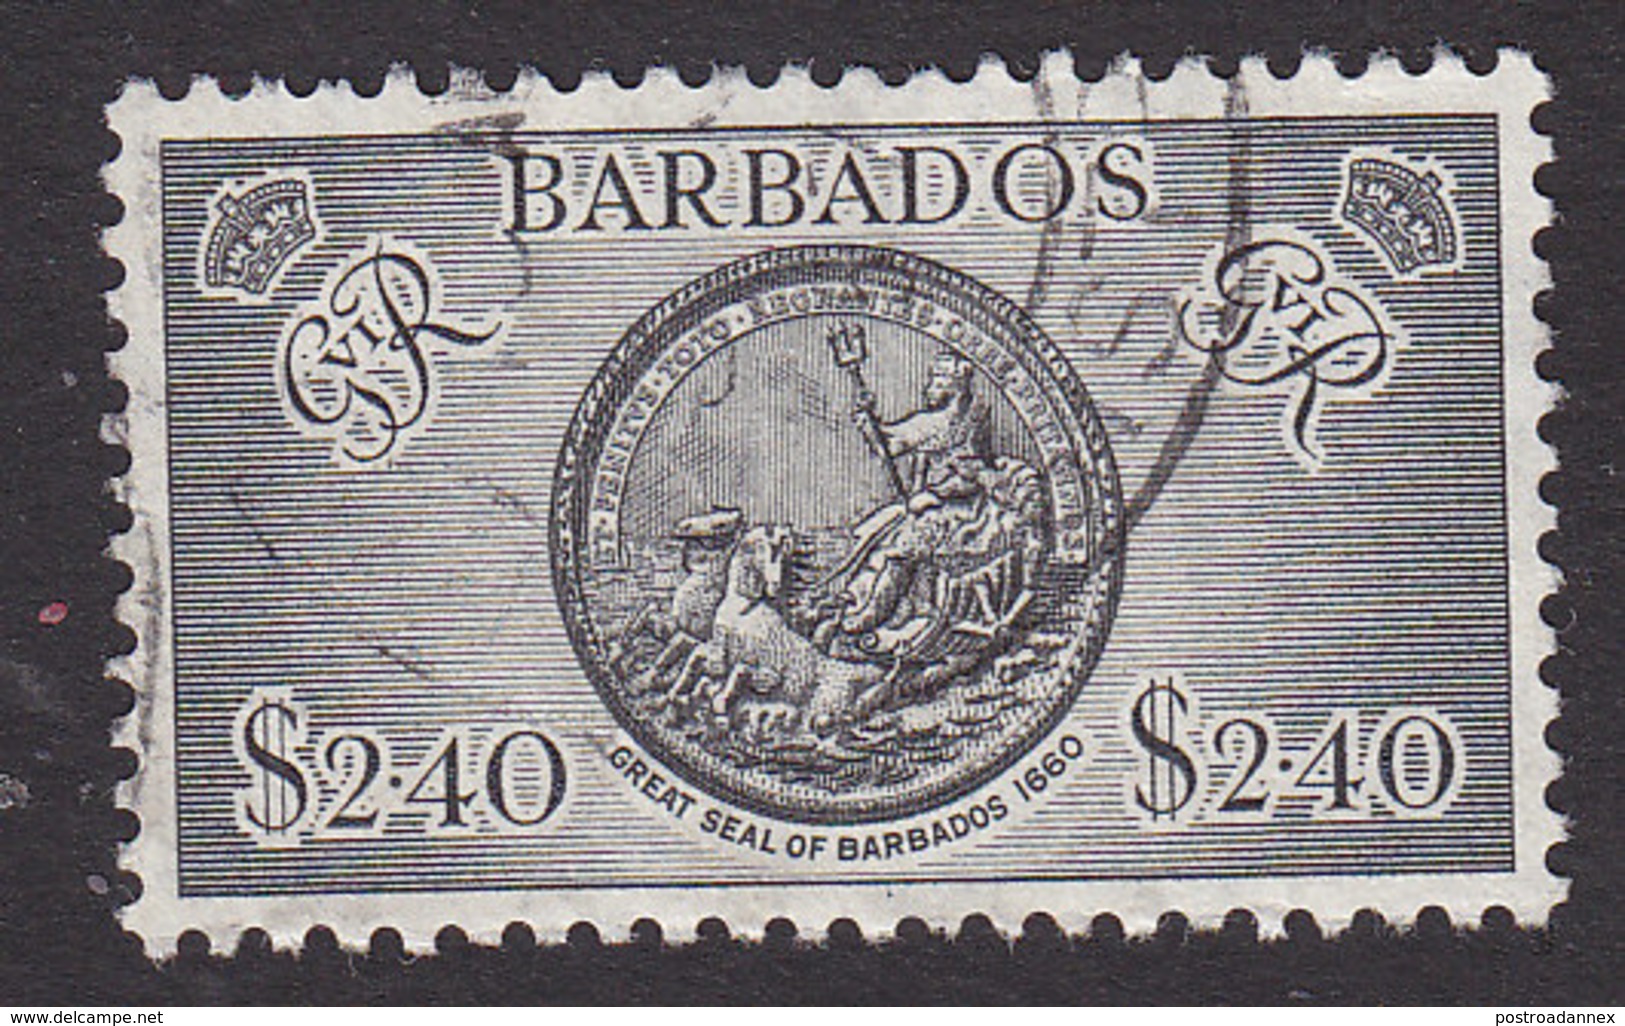 Barbados, Scott #227, Used, Great Seal, Issued 1950 - Barbados (...-1966)